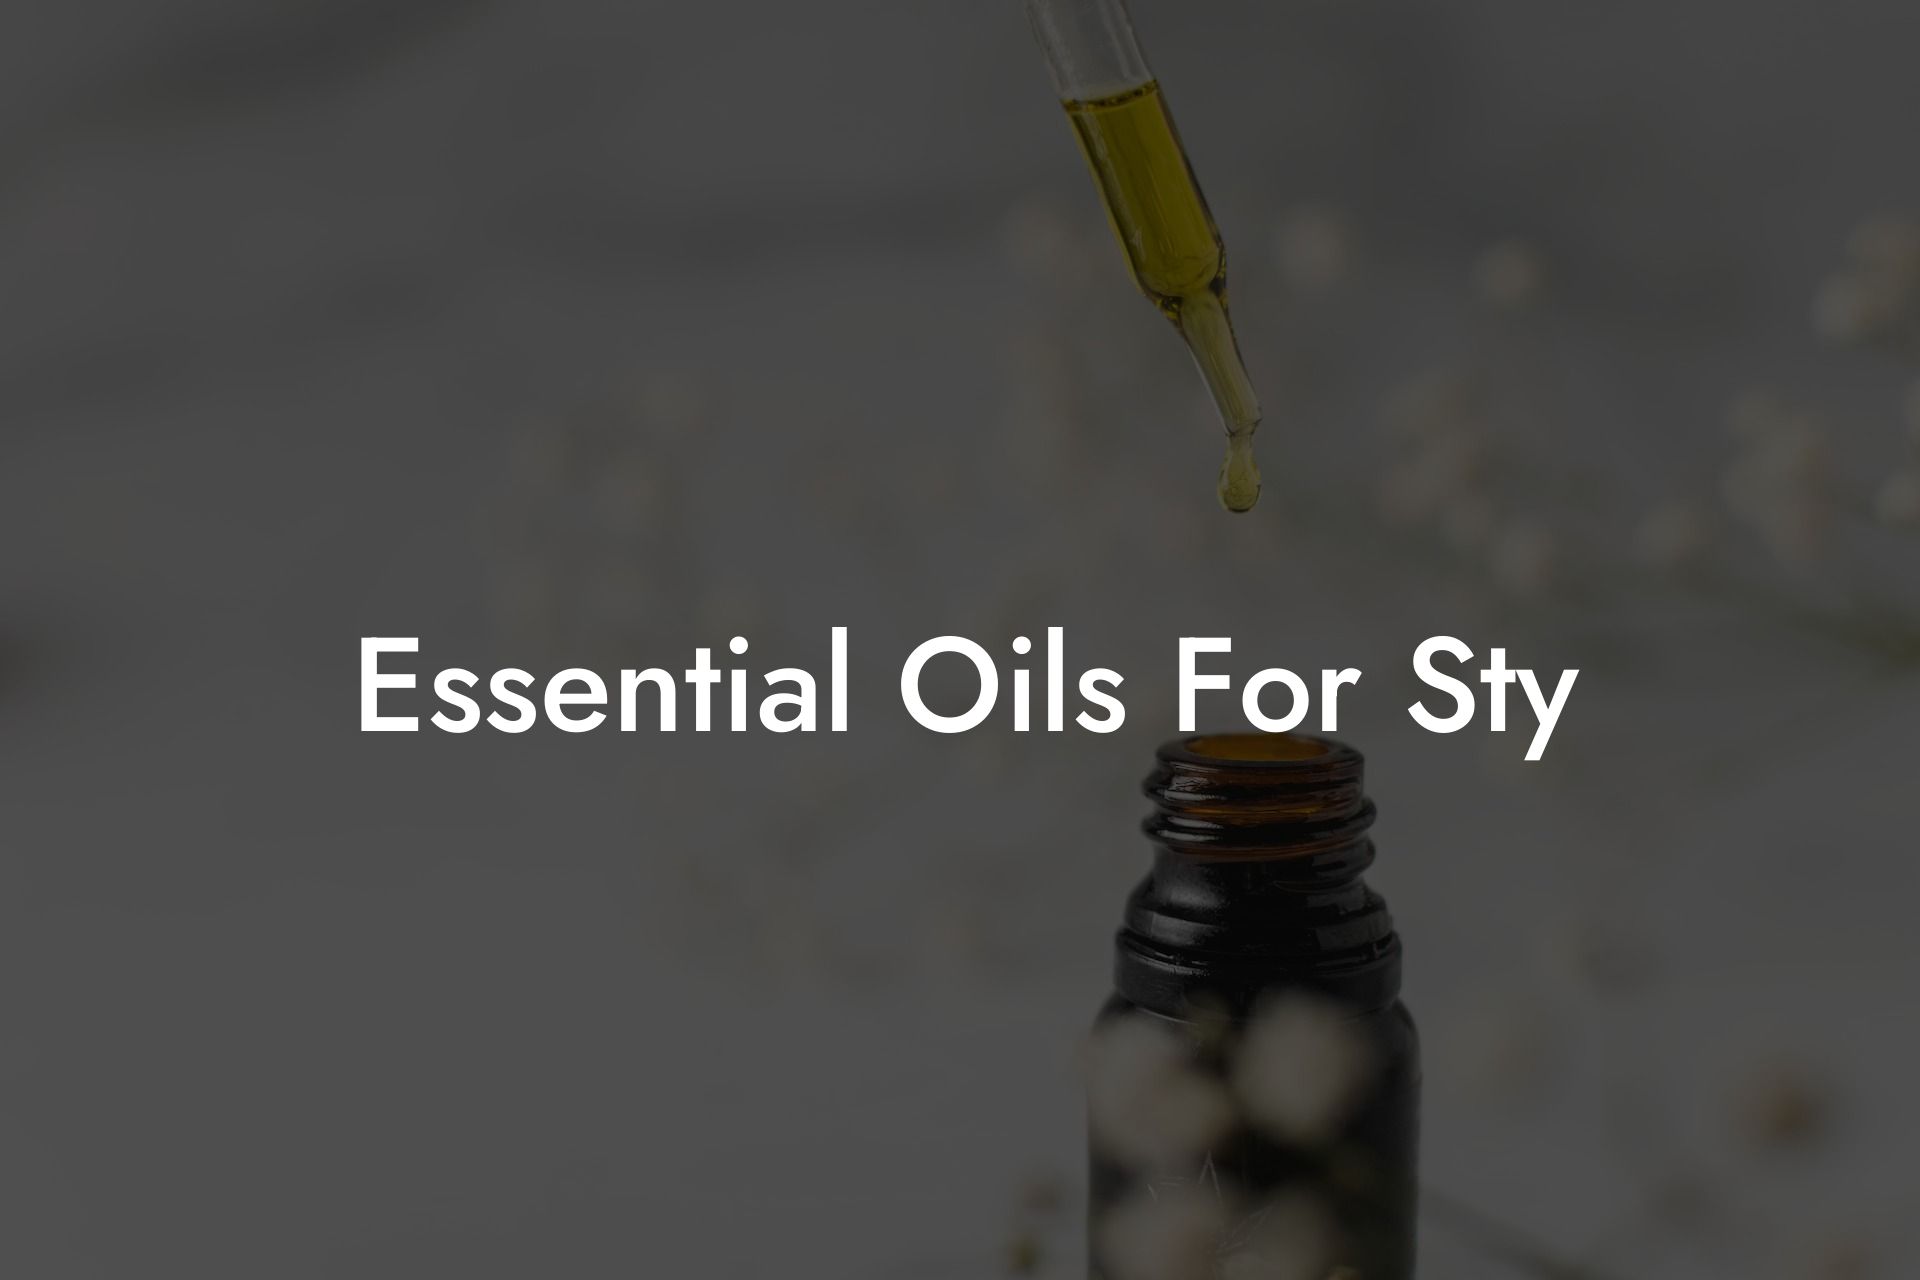 Essential Oils For Sty